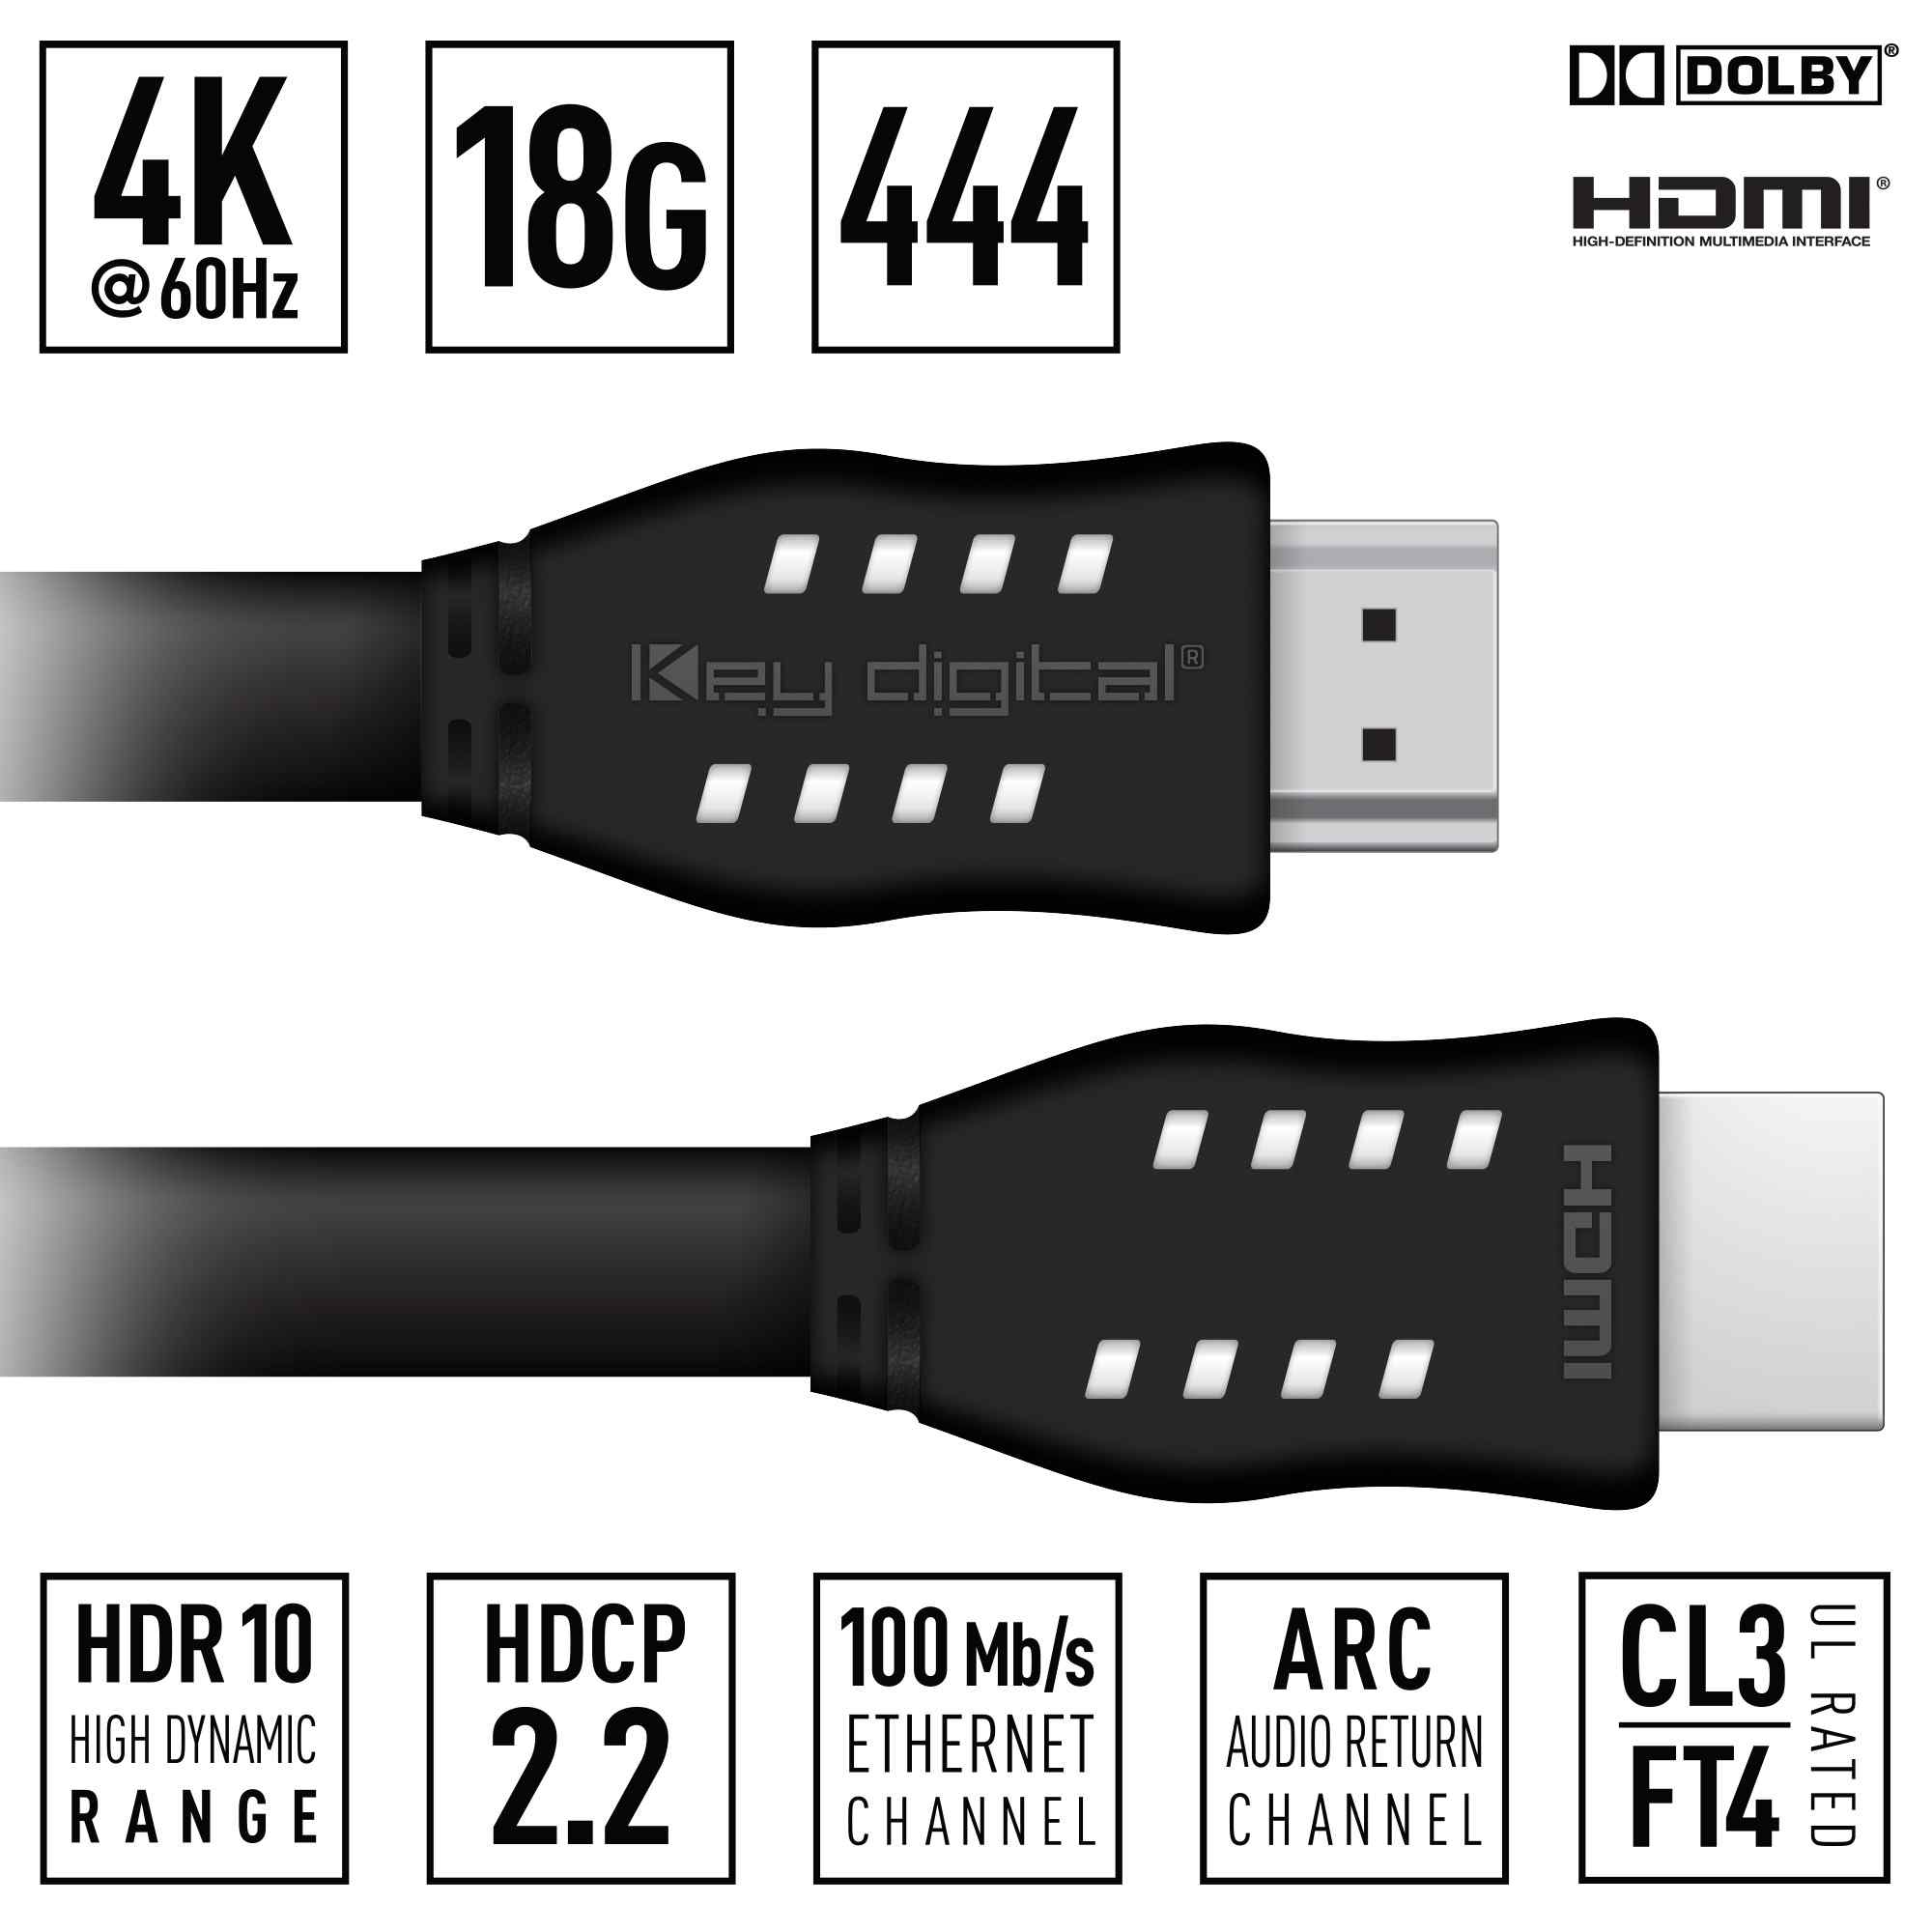 Key Digital 12-feet HDMI cable product image